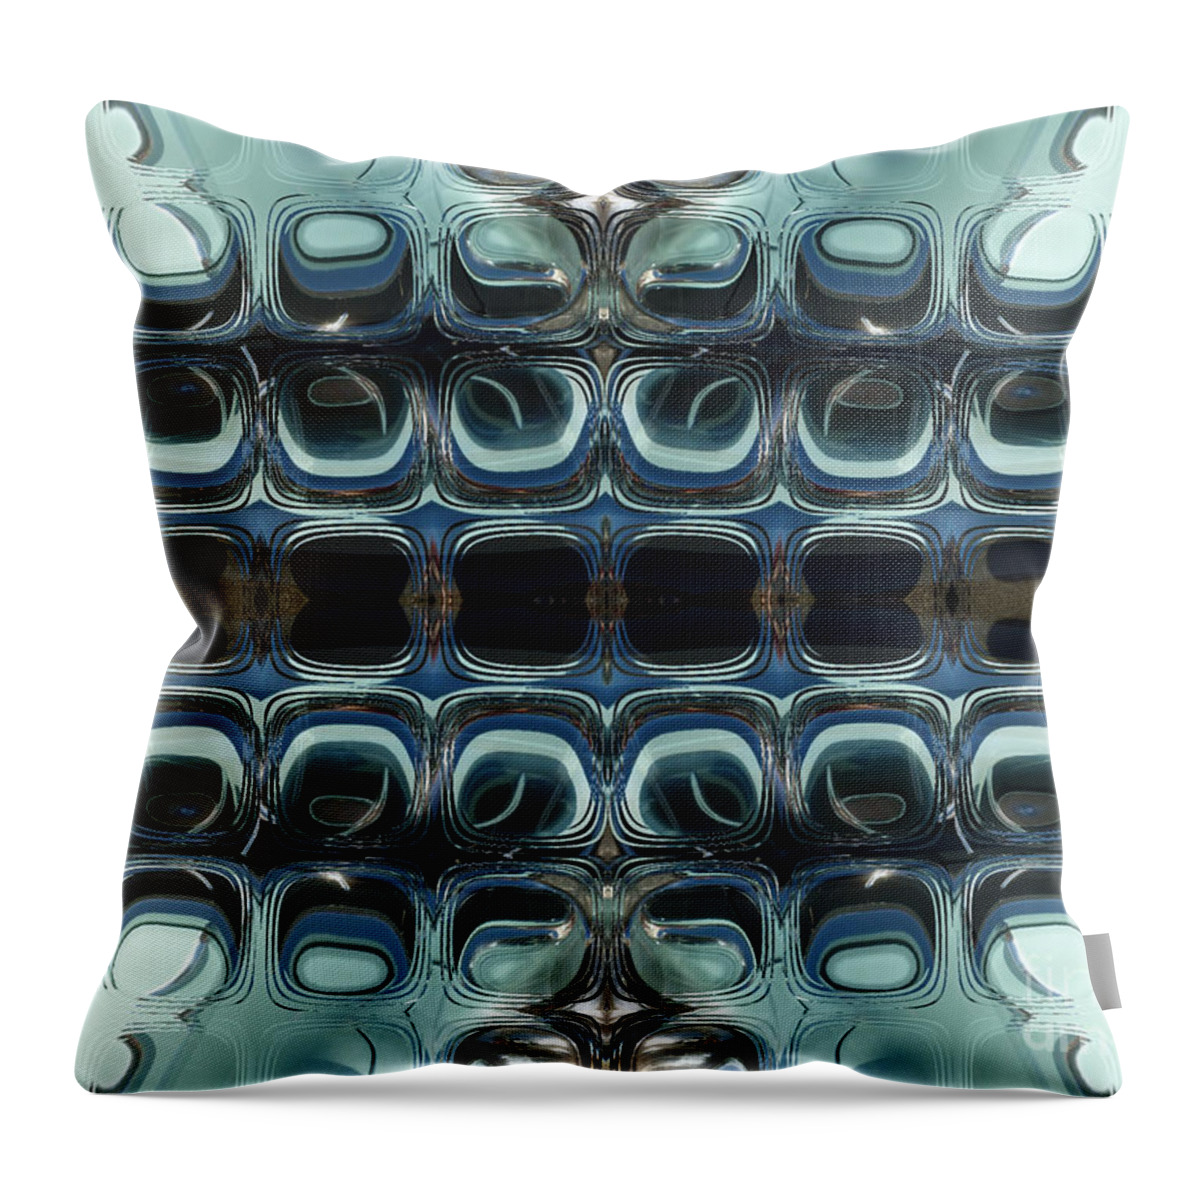 Abstract Throw Pillow featuring the digital art Abstract Horizontal Tile Pattern - Steel by Jason Freedman